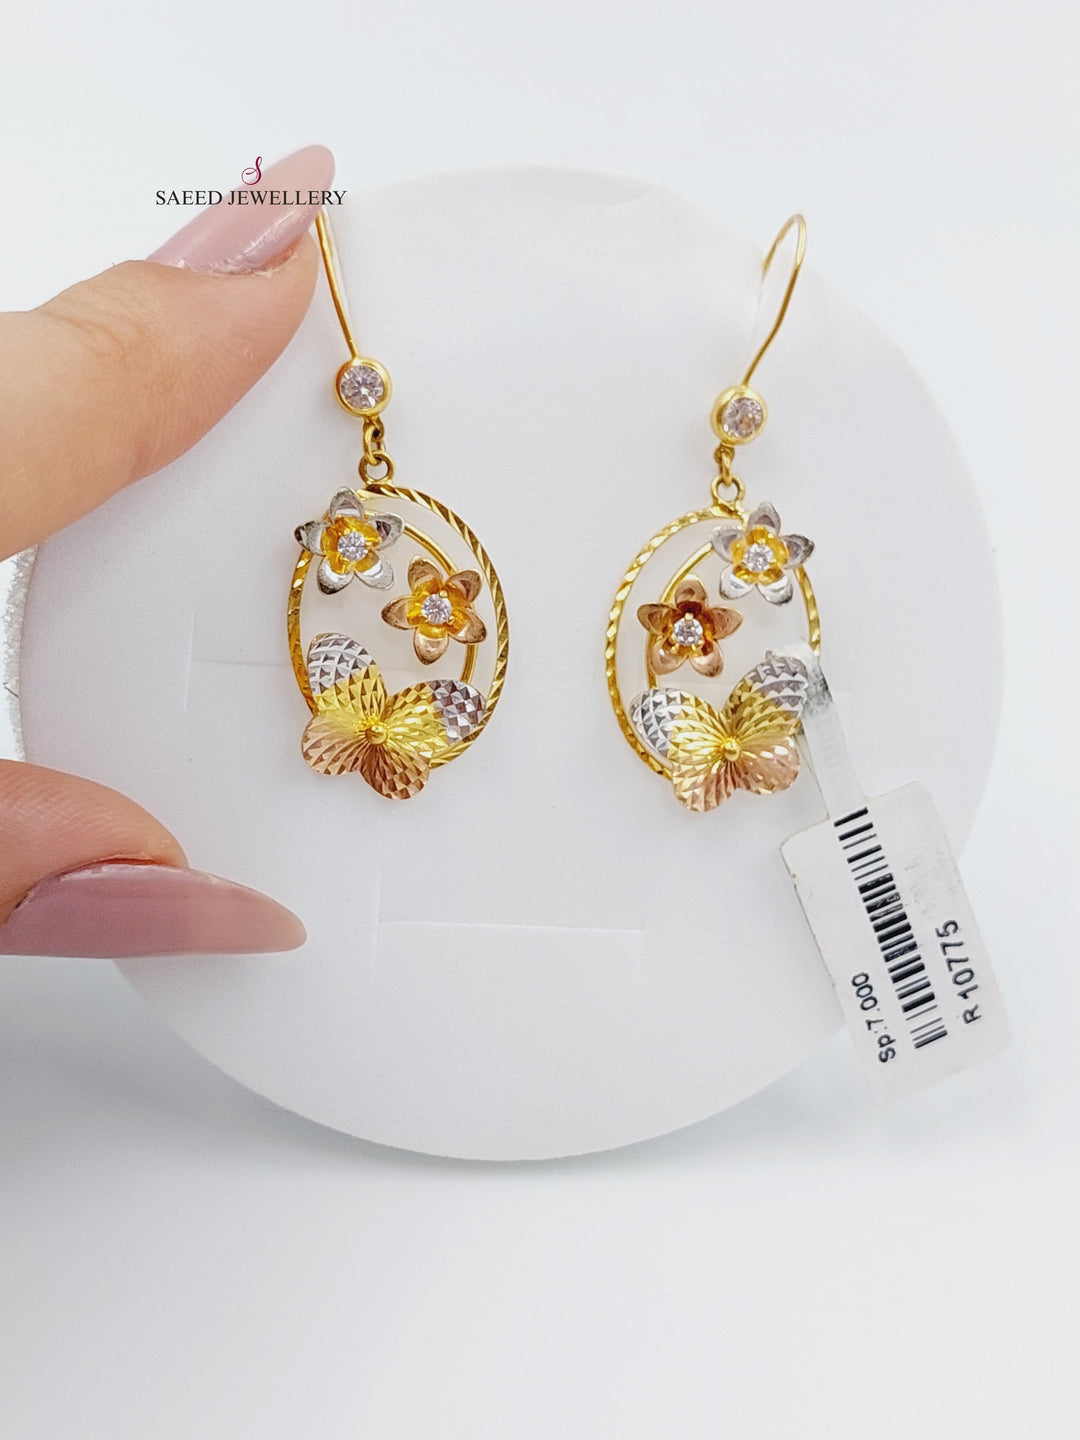 21K Fancy Earrings Made of 21K Yellow Gold by Saeed Jewelry-خاتم-اكسترا-65